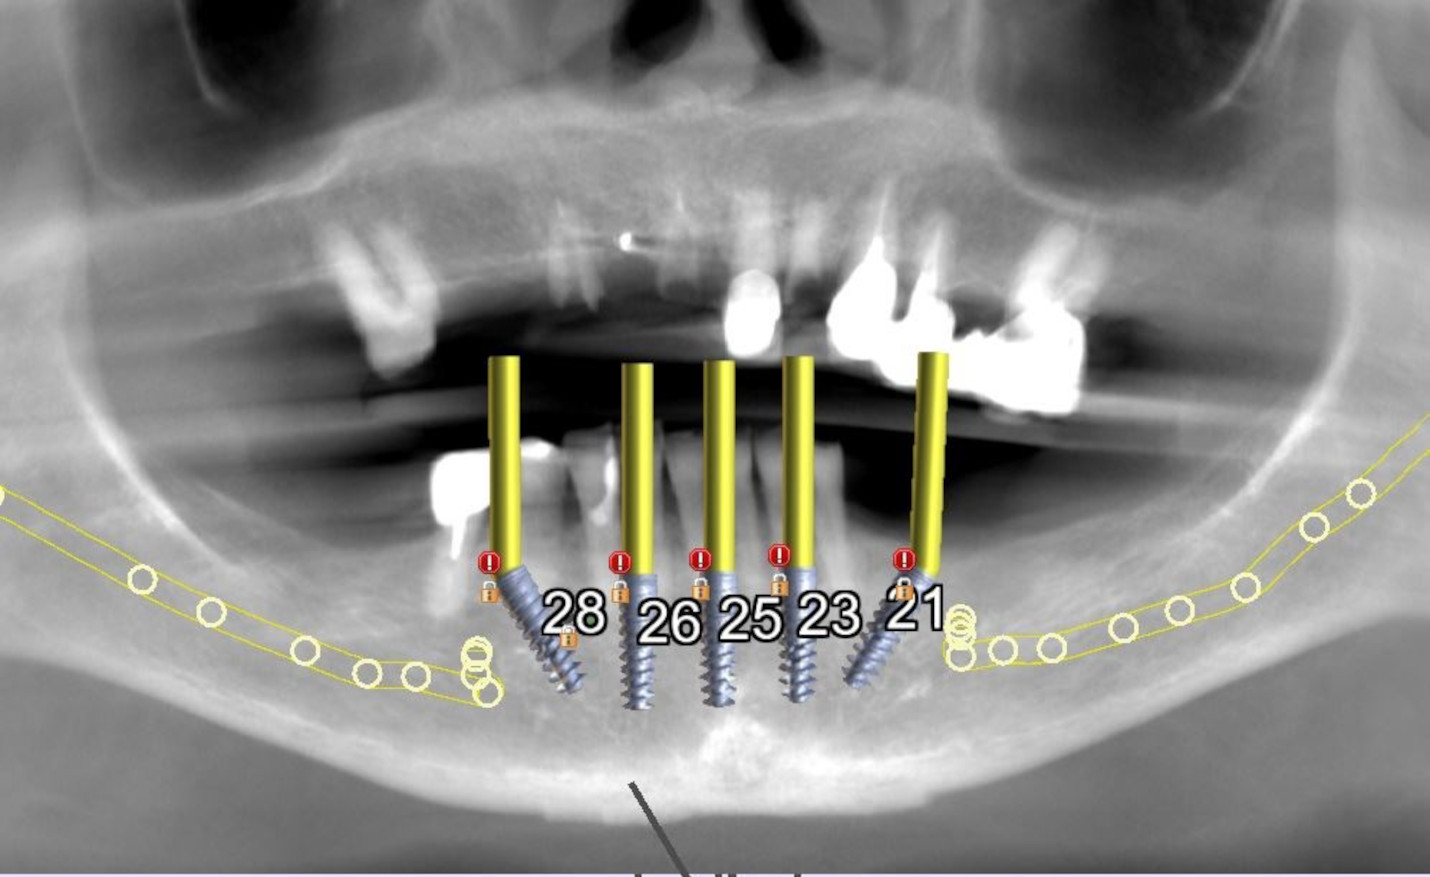 Fig. 3b: Five simulated implants with two tilted to avoid the inferior alveolar nerves in the mandibular arch.